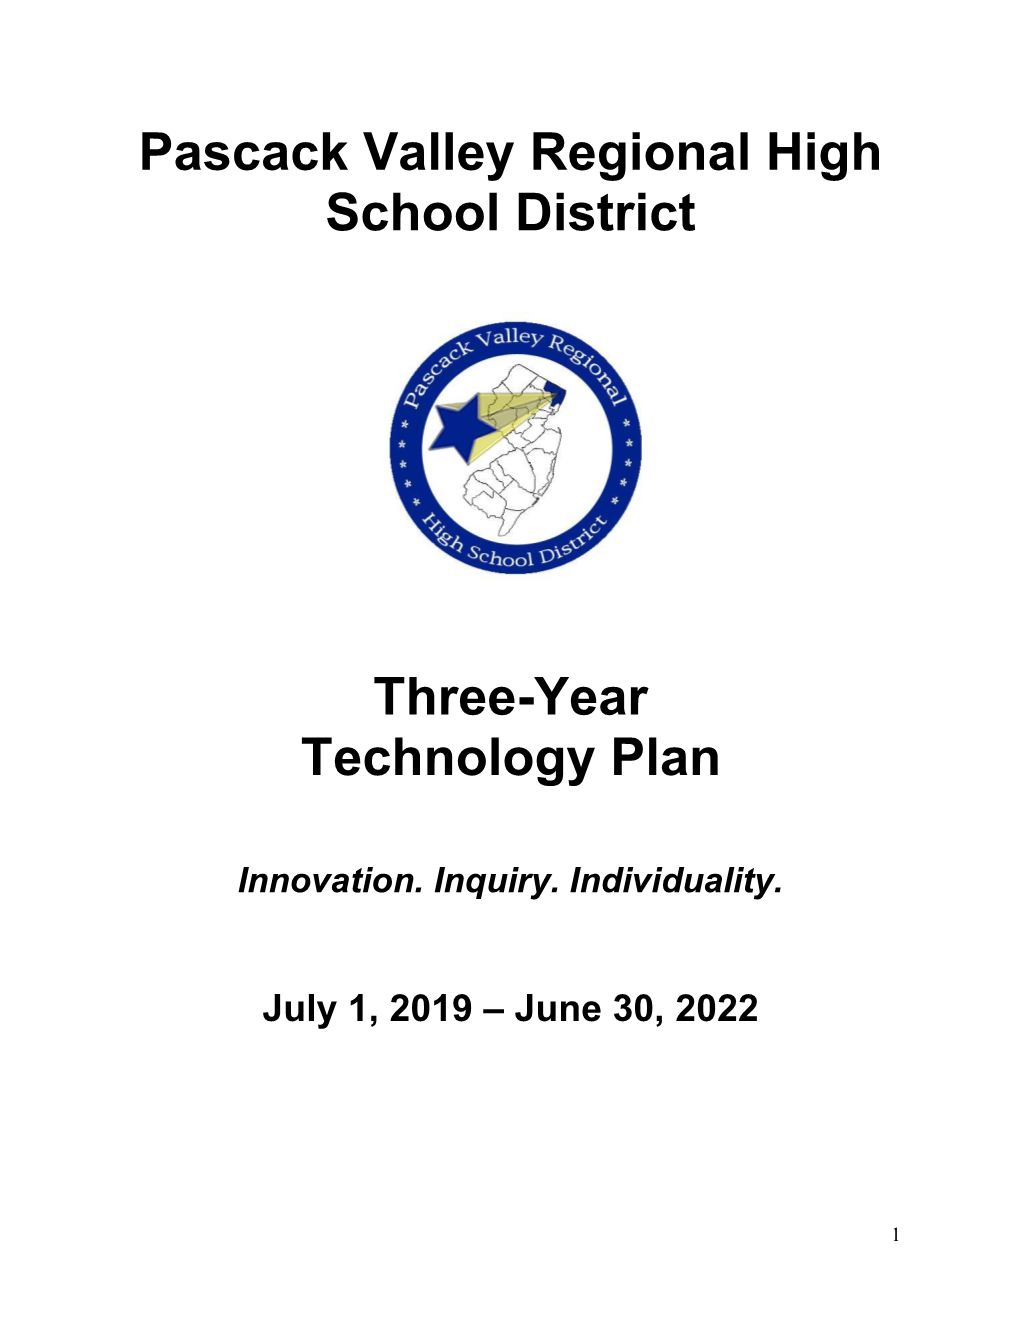 Pascack Valley Regional High School District